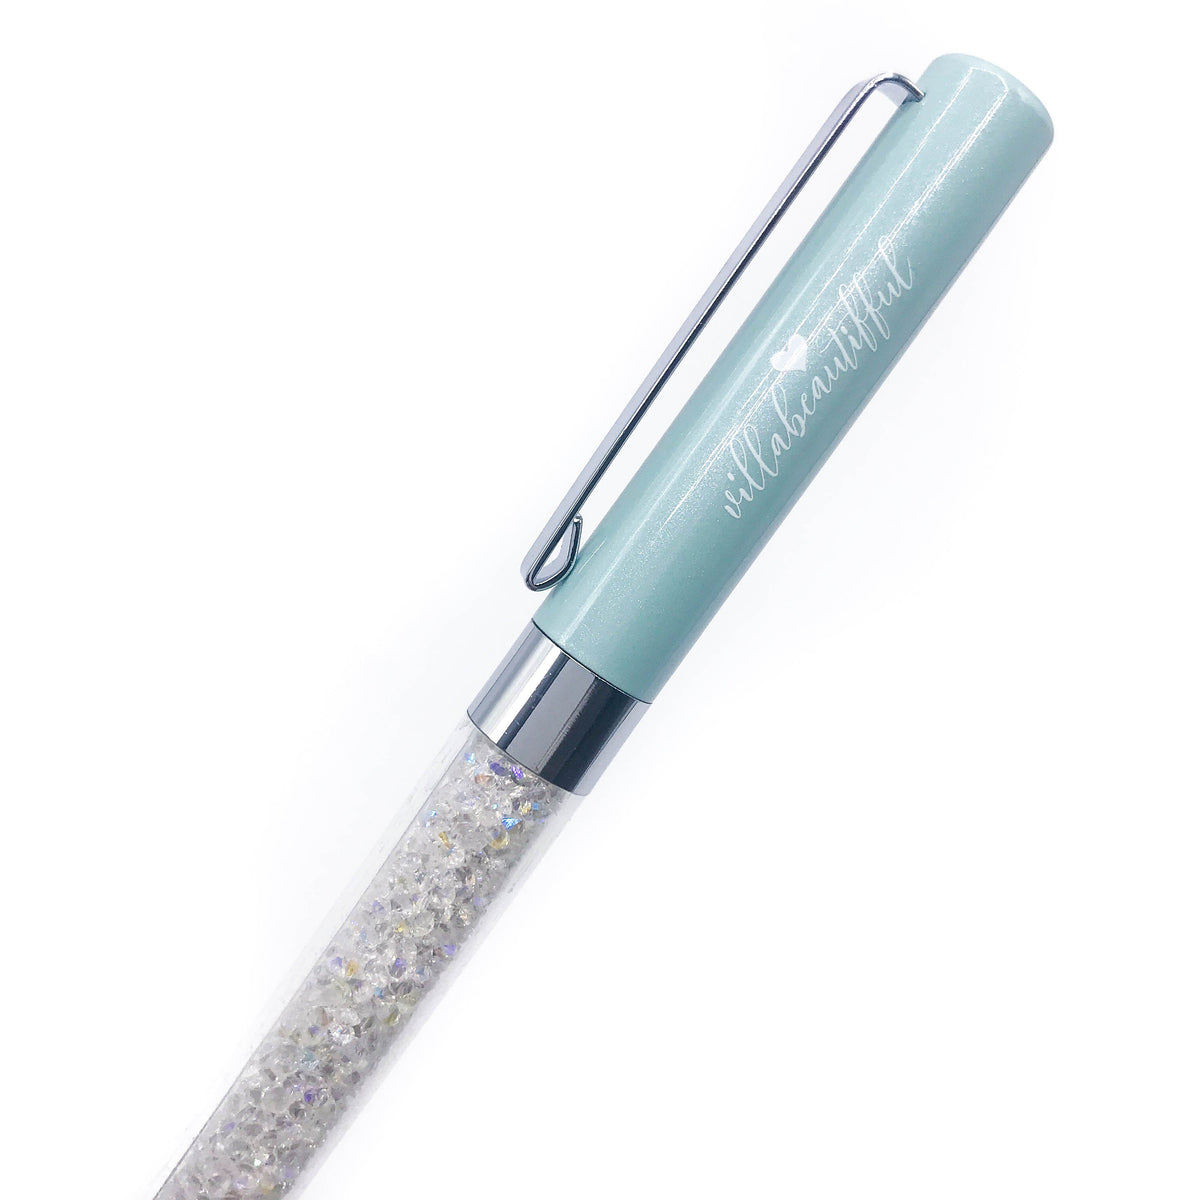 Refreshed Imperfect Crystal VBPen | limited kit pen